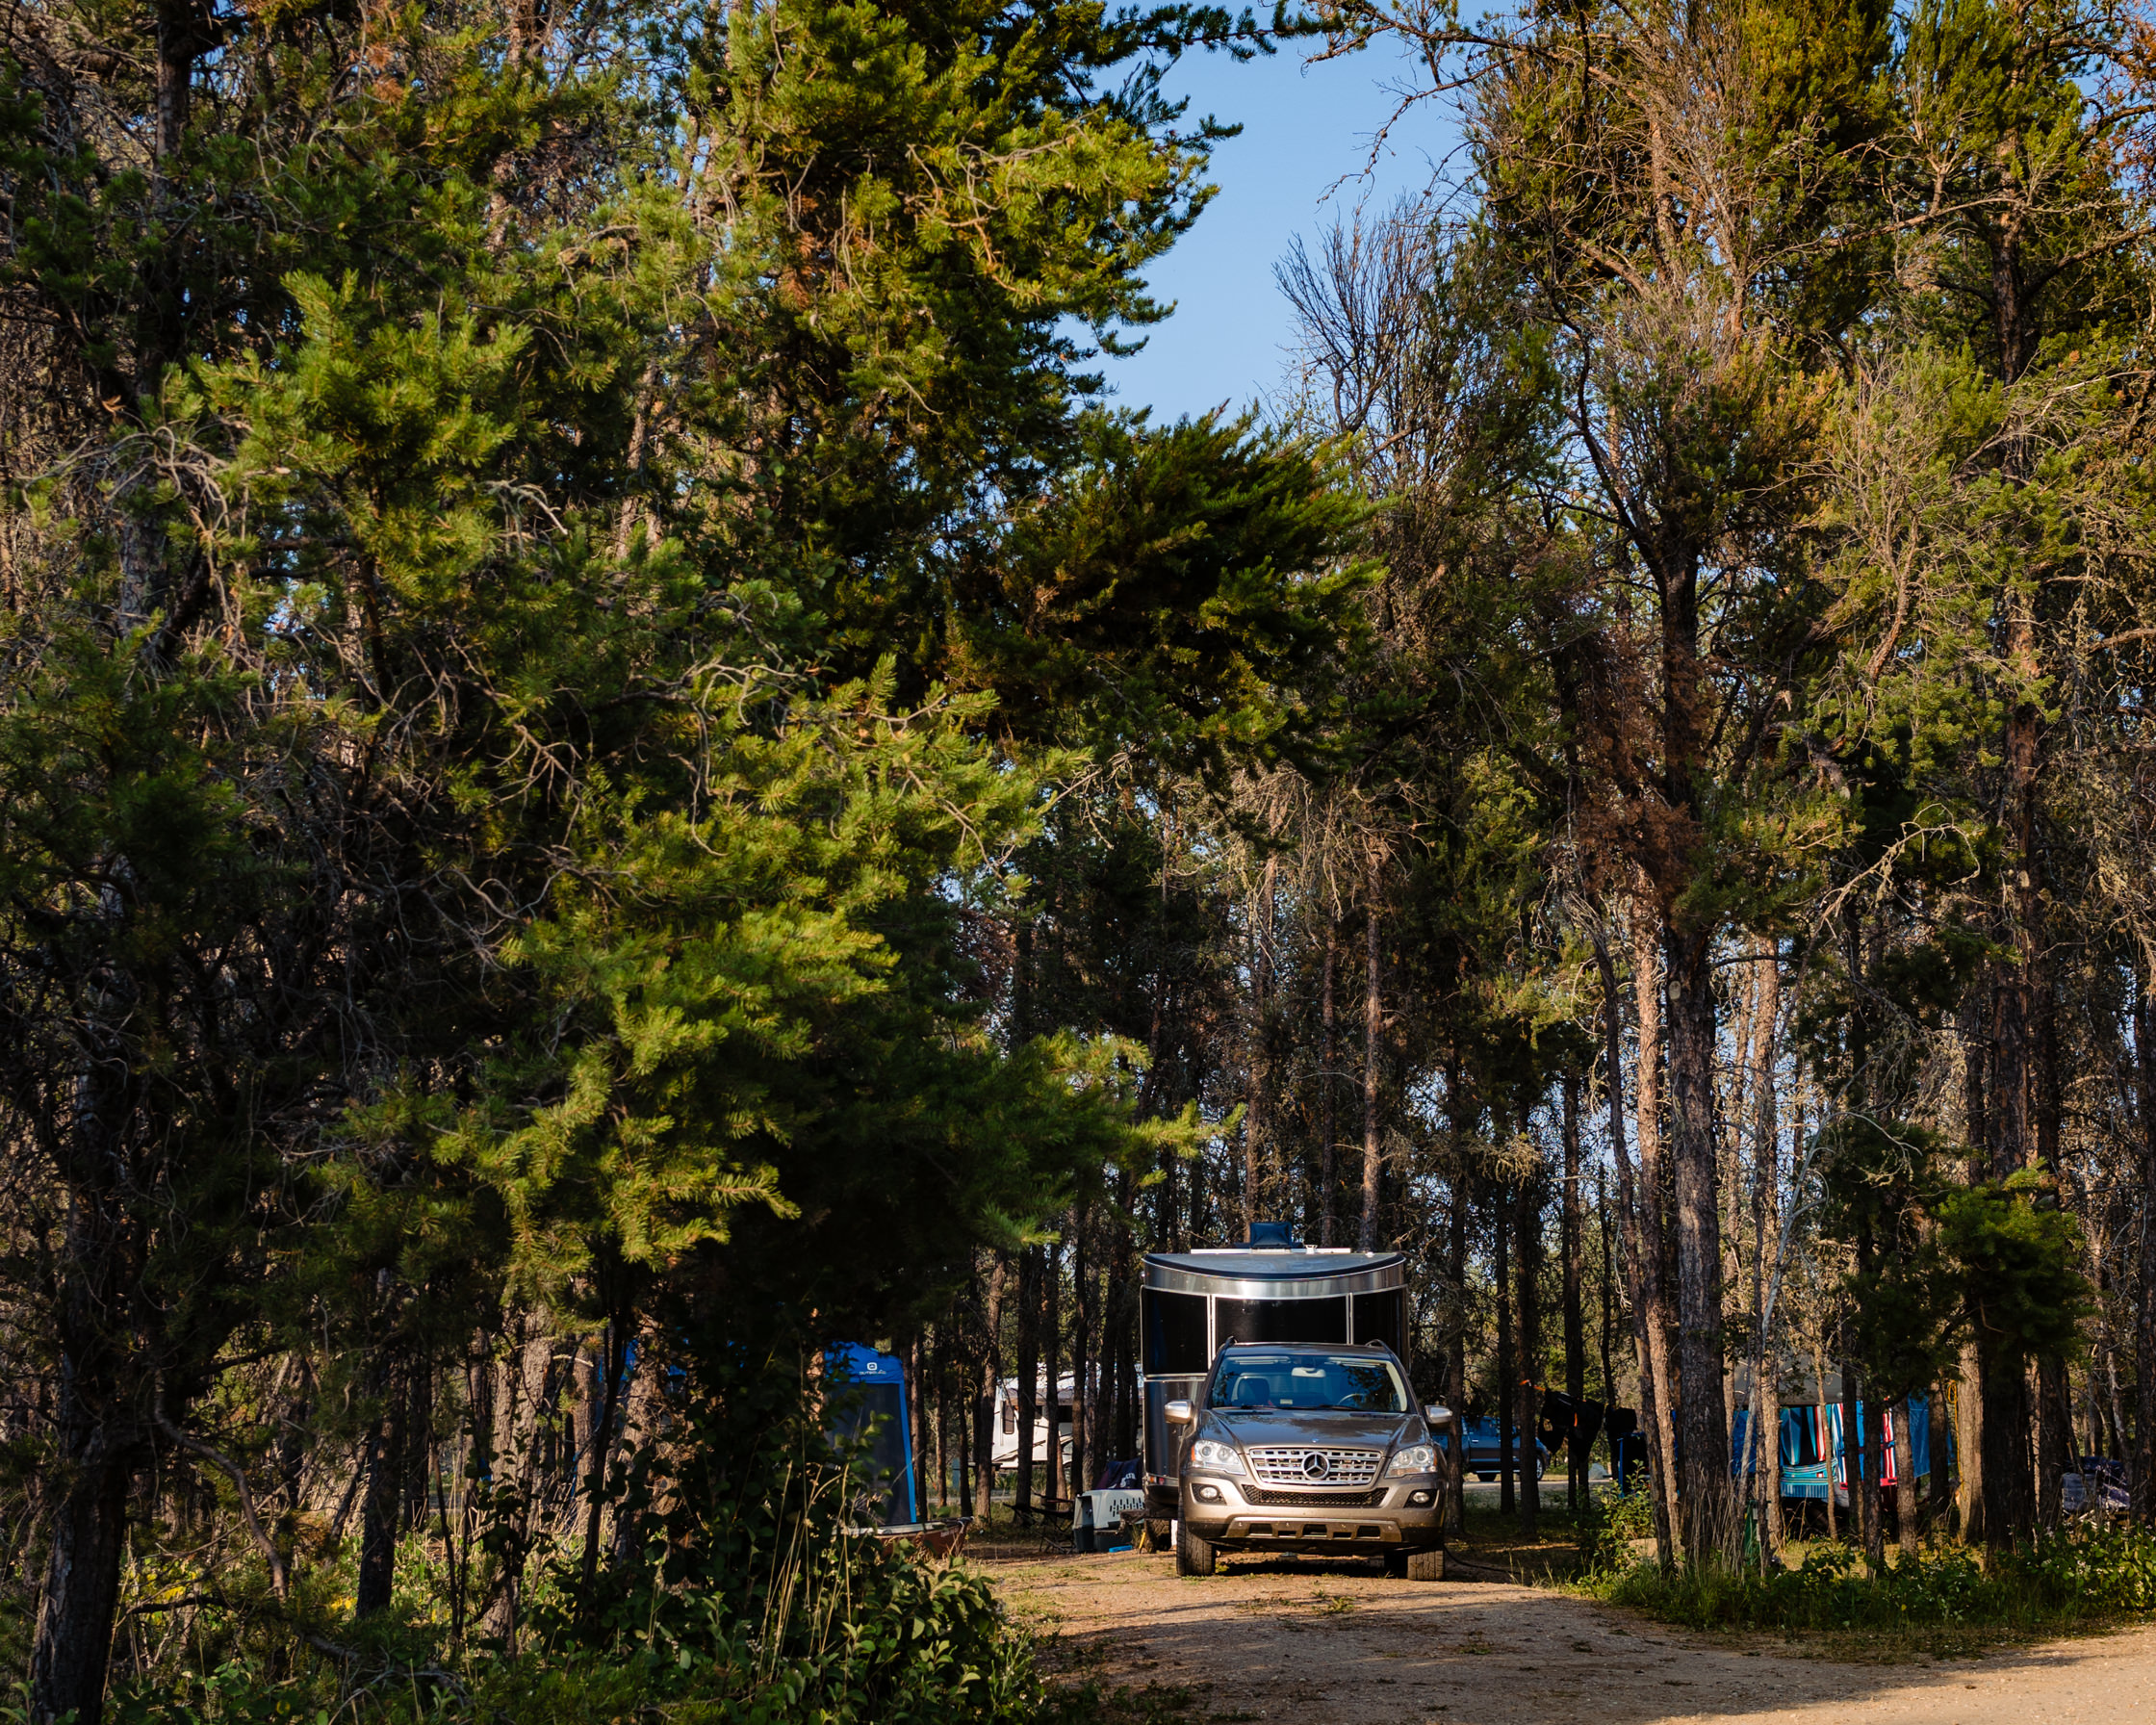 Campsite at Moose Lake Campground · Photo by The 38 Photography